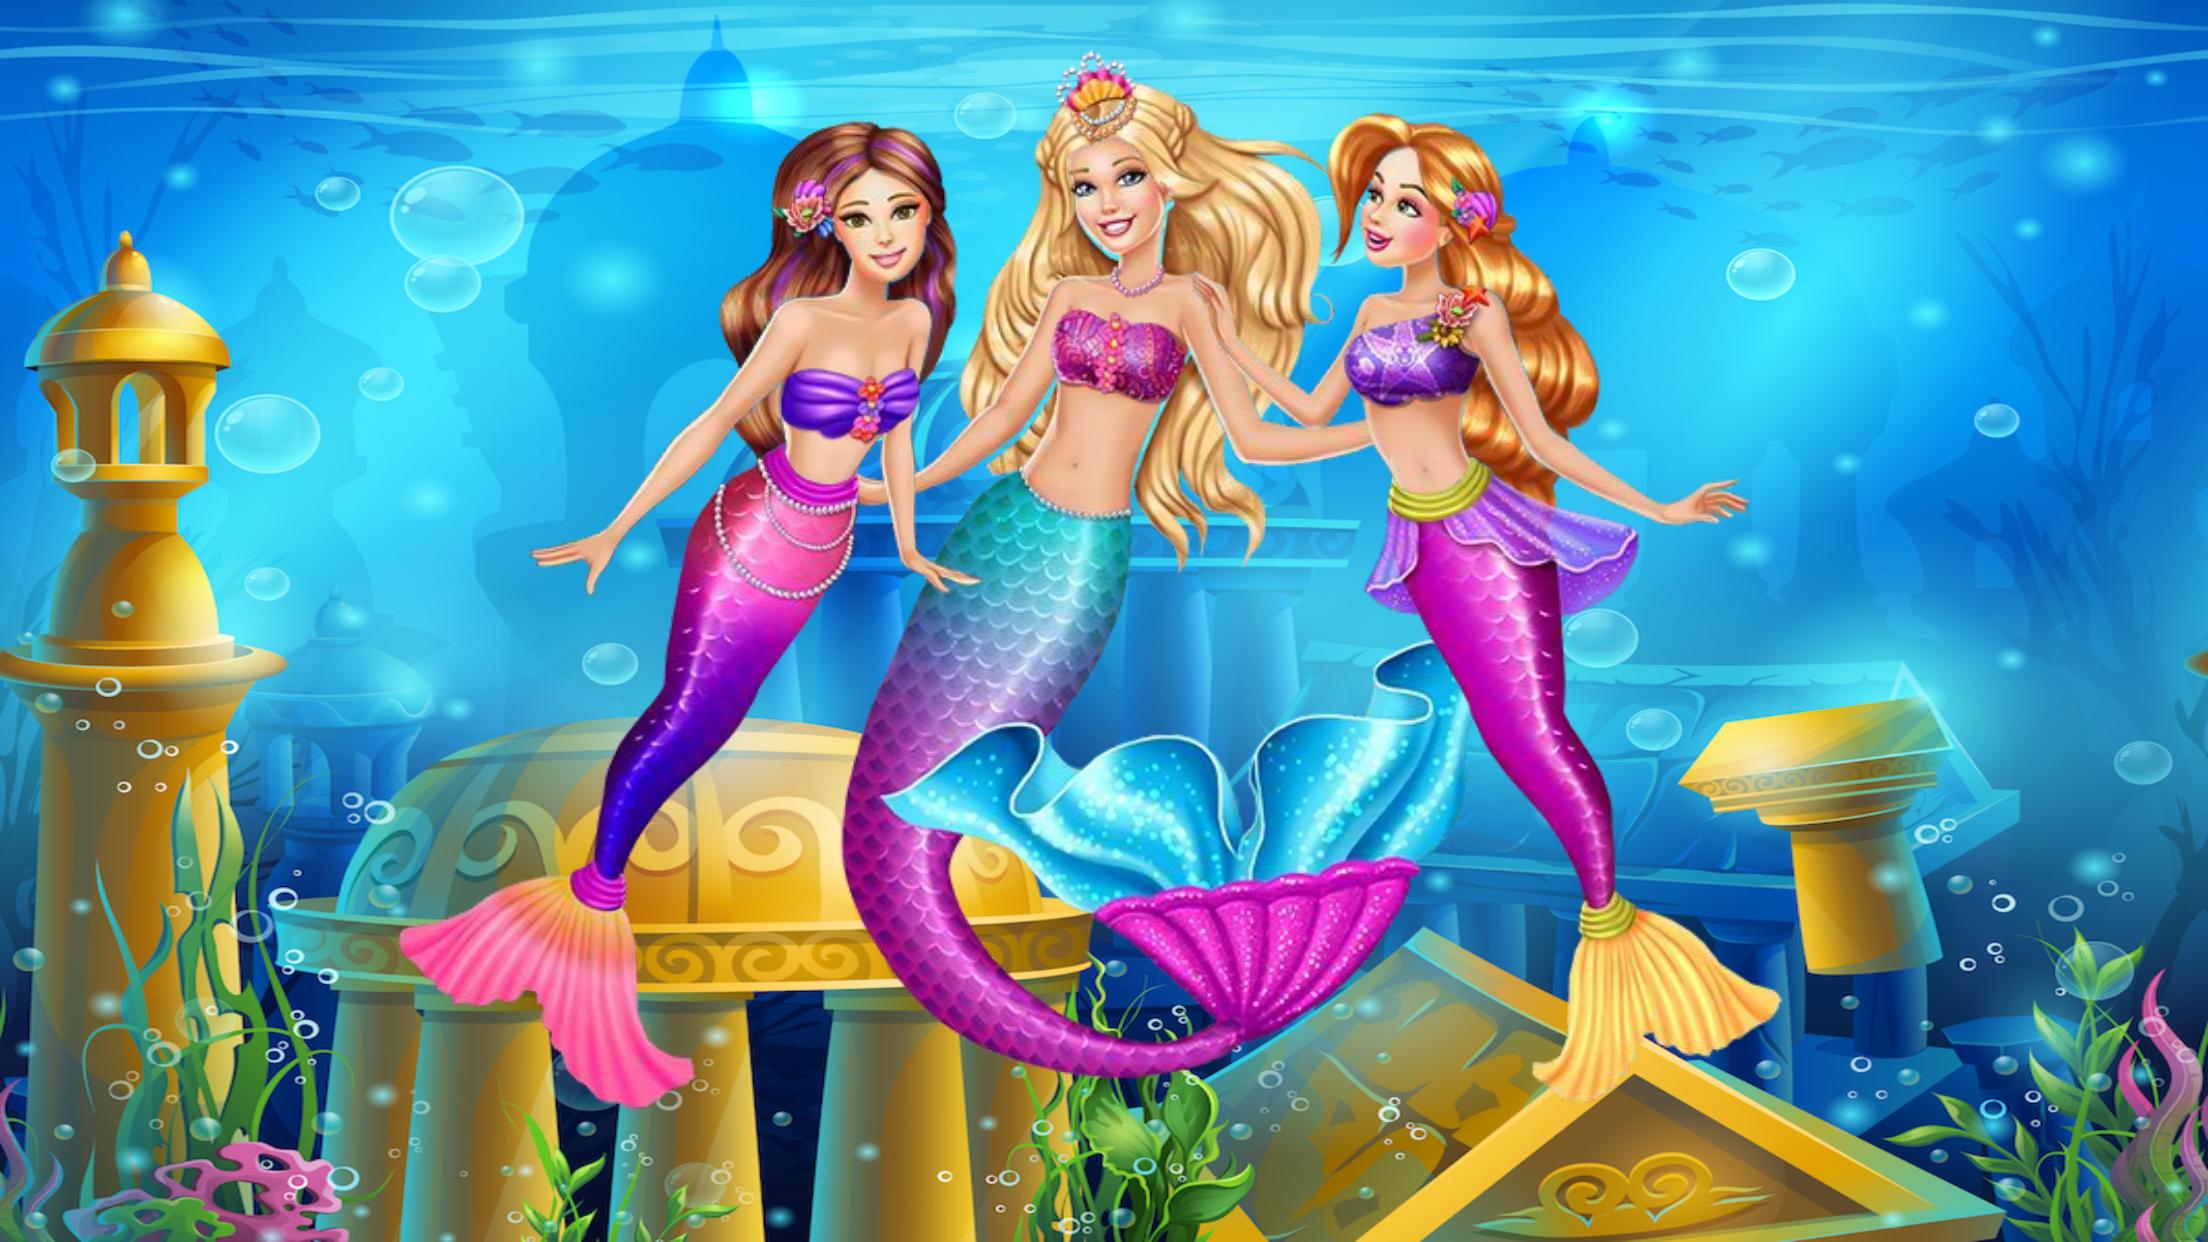 Dress Up Barbie Mermaid for Android - APK Download